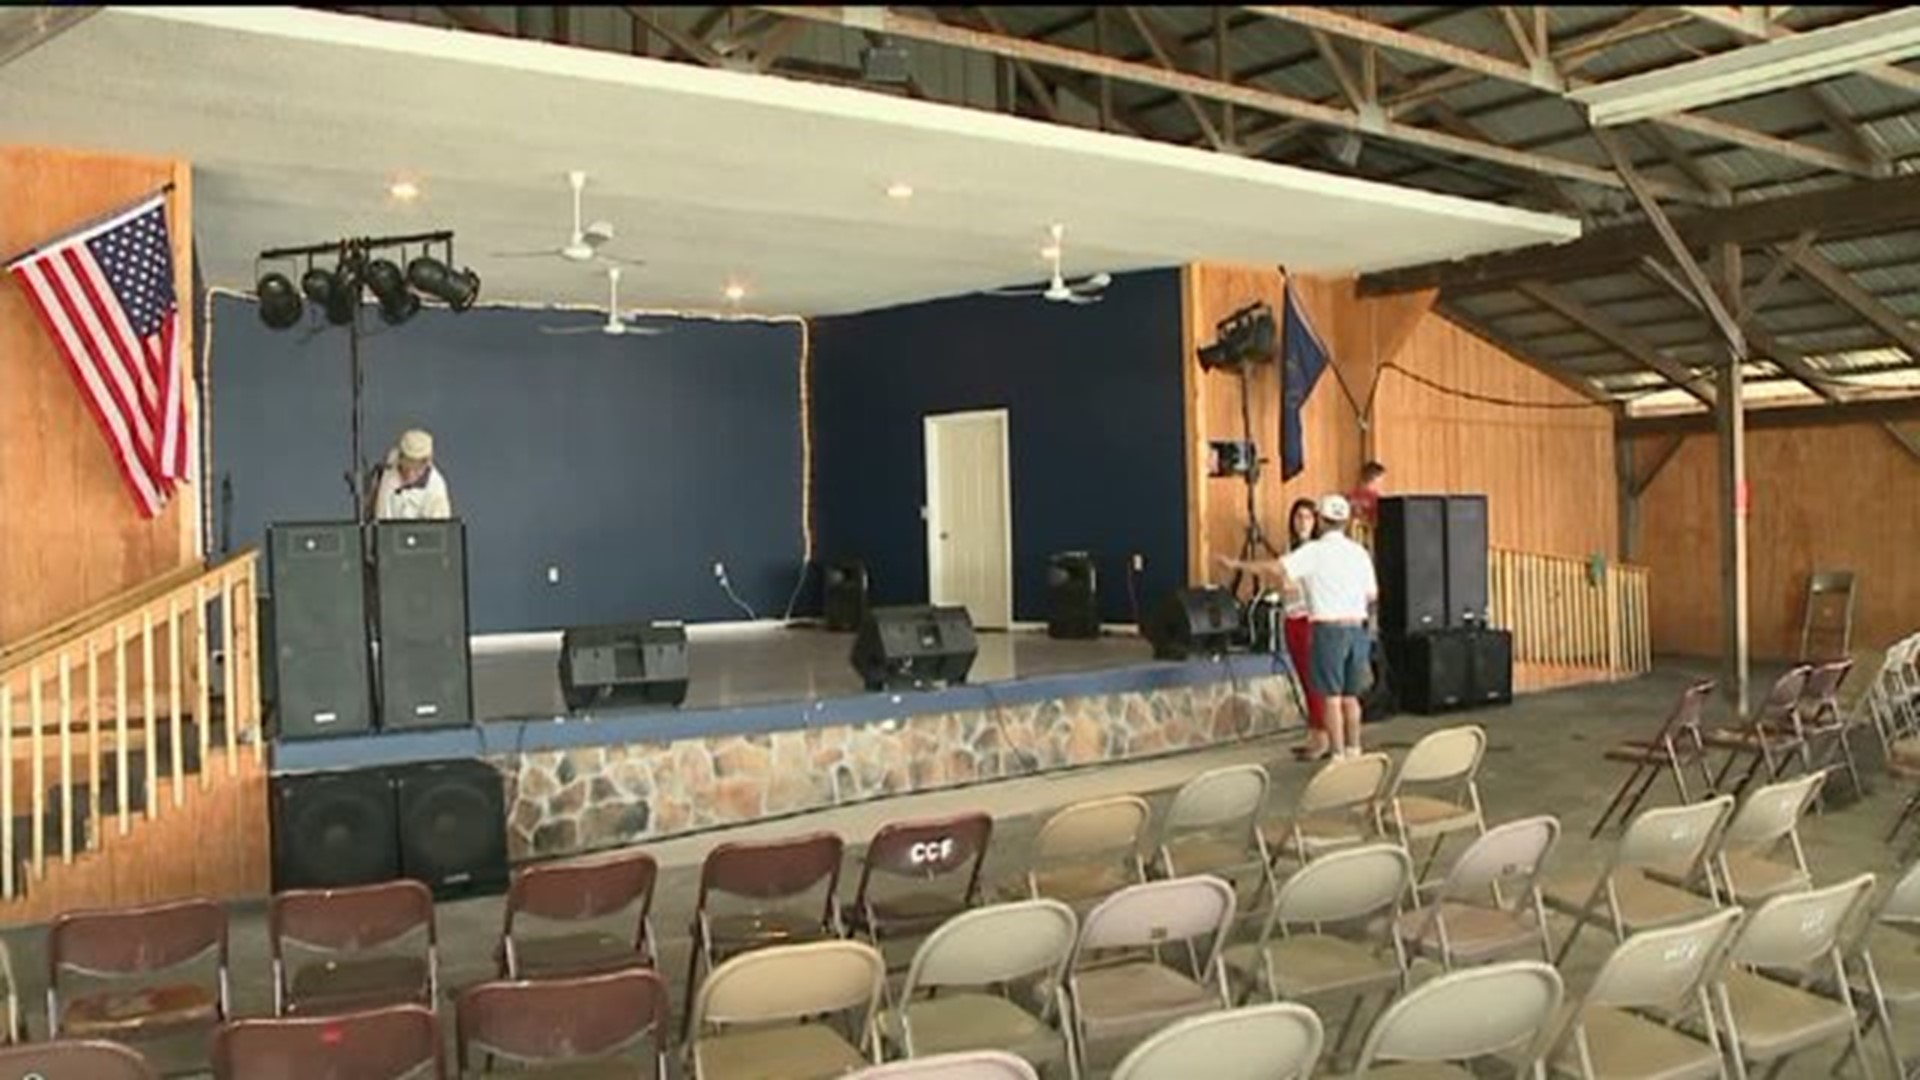 Volunteers Build Stage at Clinton County Fairgrounds